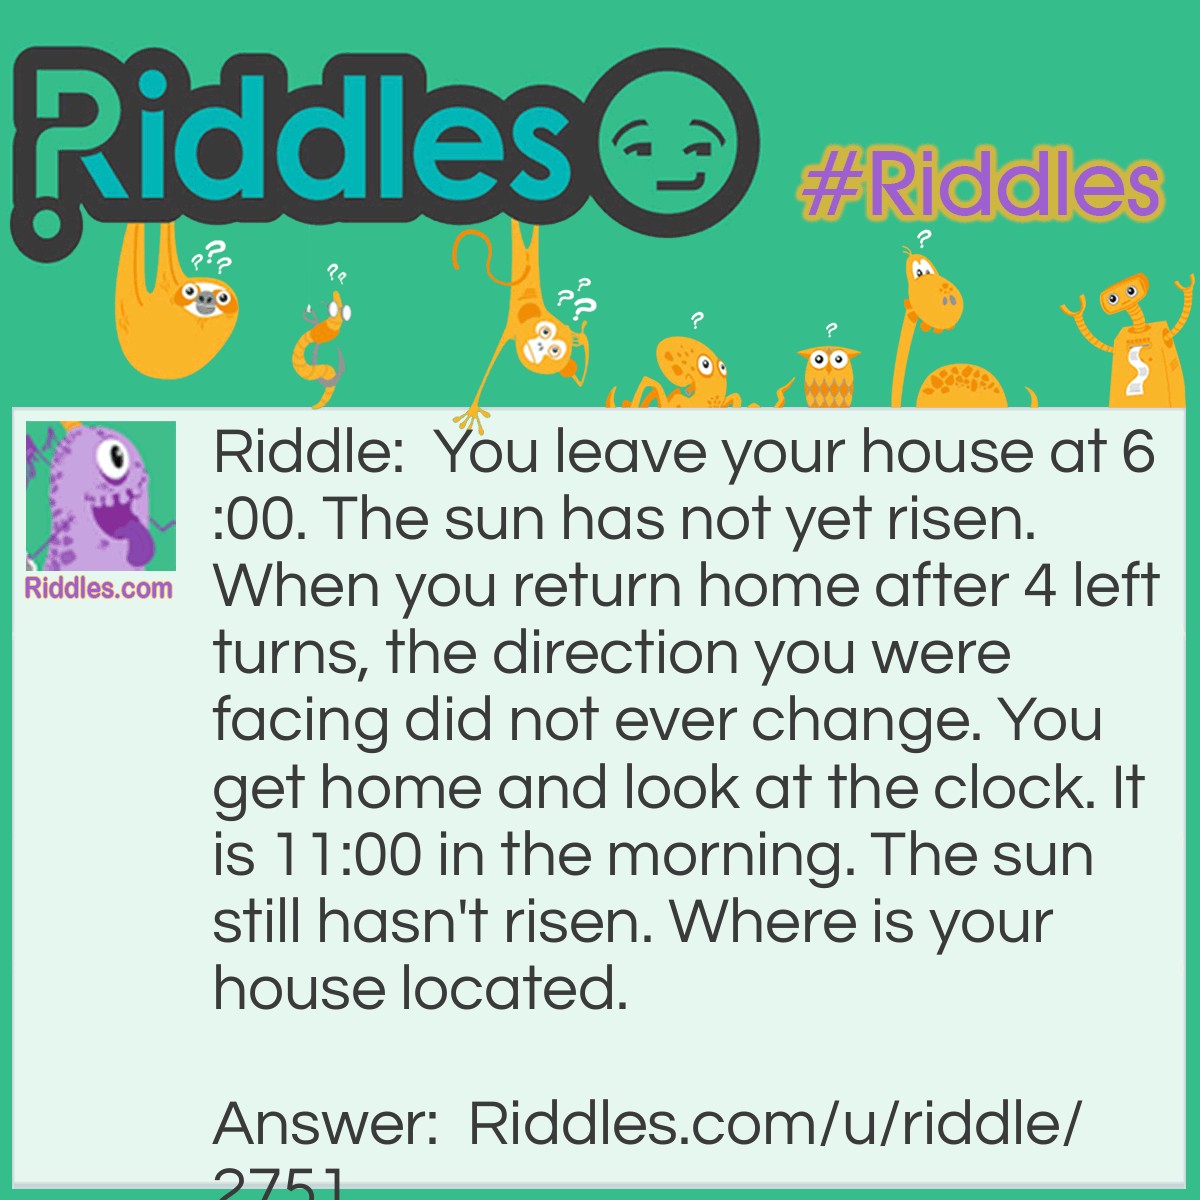 Riddle: You leave your house at 6:00. The sun has not yet risen. When you return home after 4 left turns, the direction you were facing did not ever change. You get home and look at the clock. It is 11:00 in the morning. The sun still hasn't risen. Where is your house located. Answer: The North Pole.